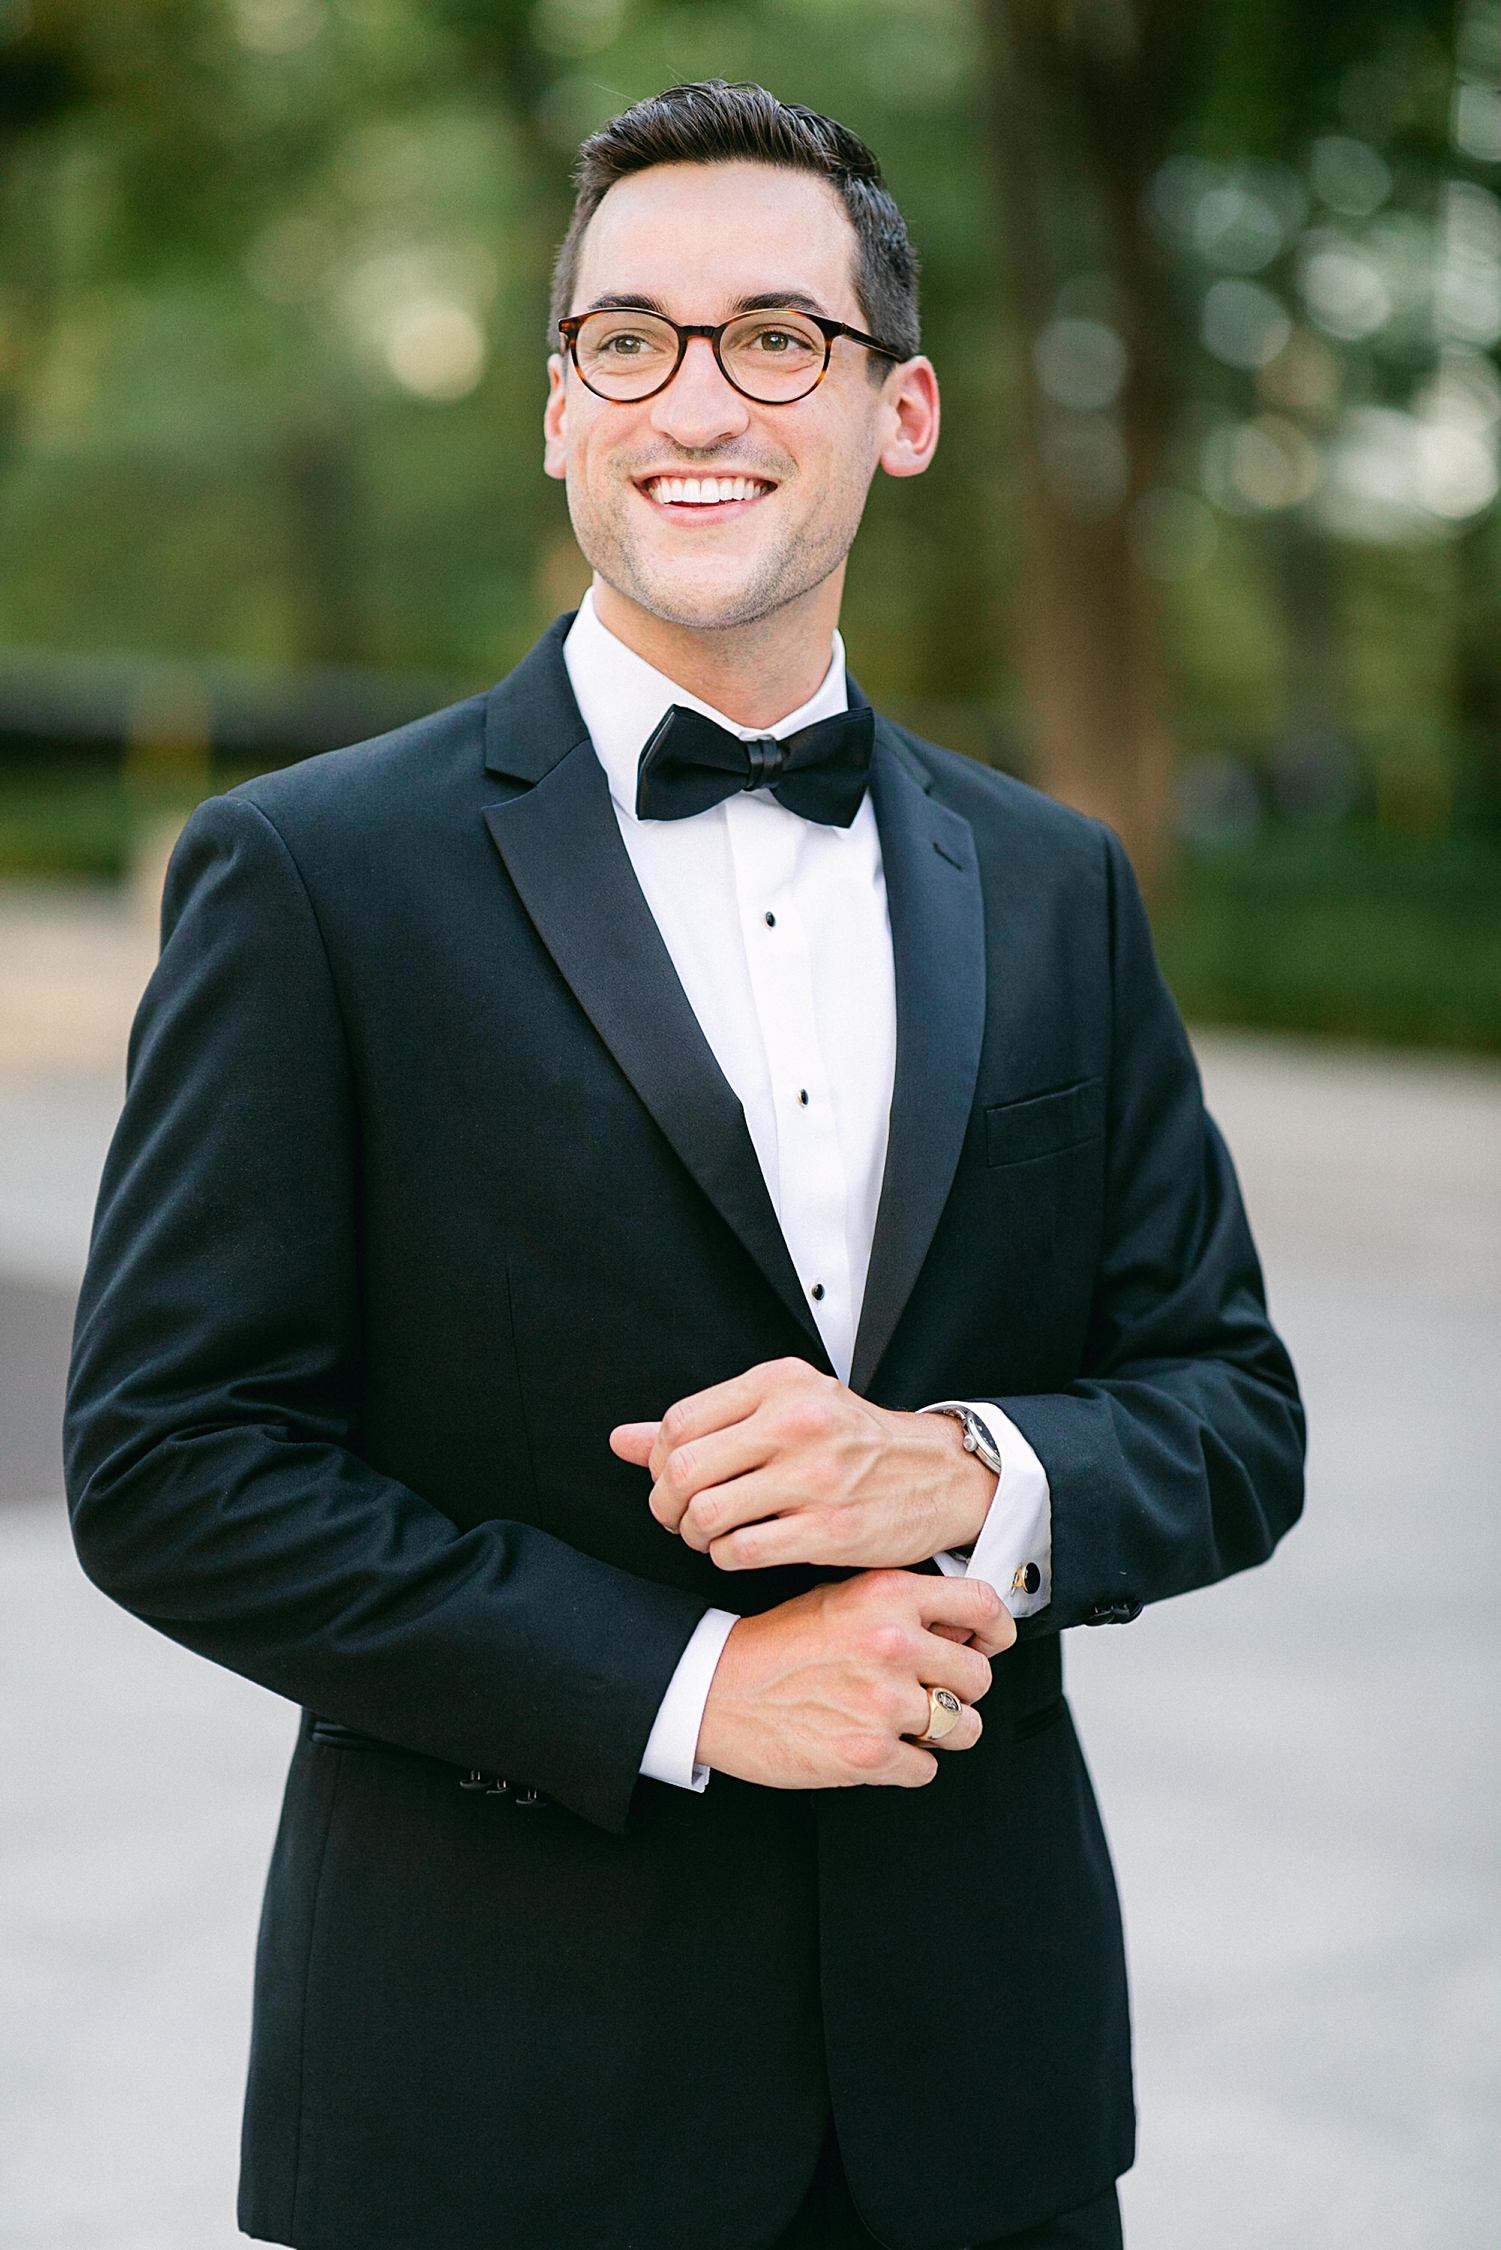 Man in black tuxedo smiling and adjusting cuffs